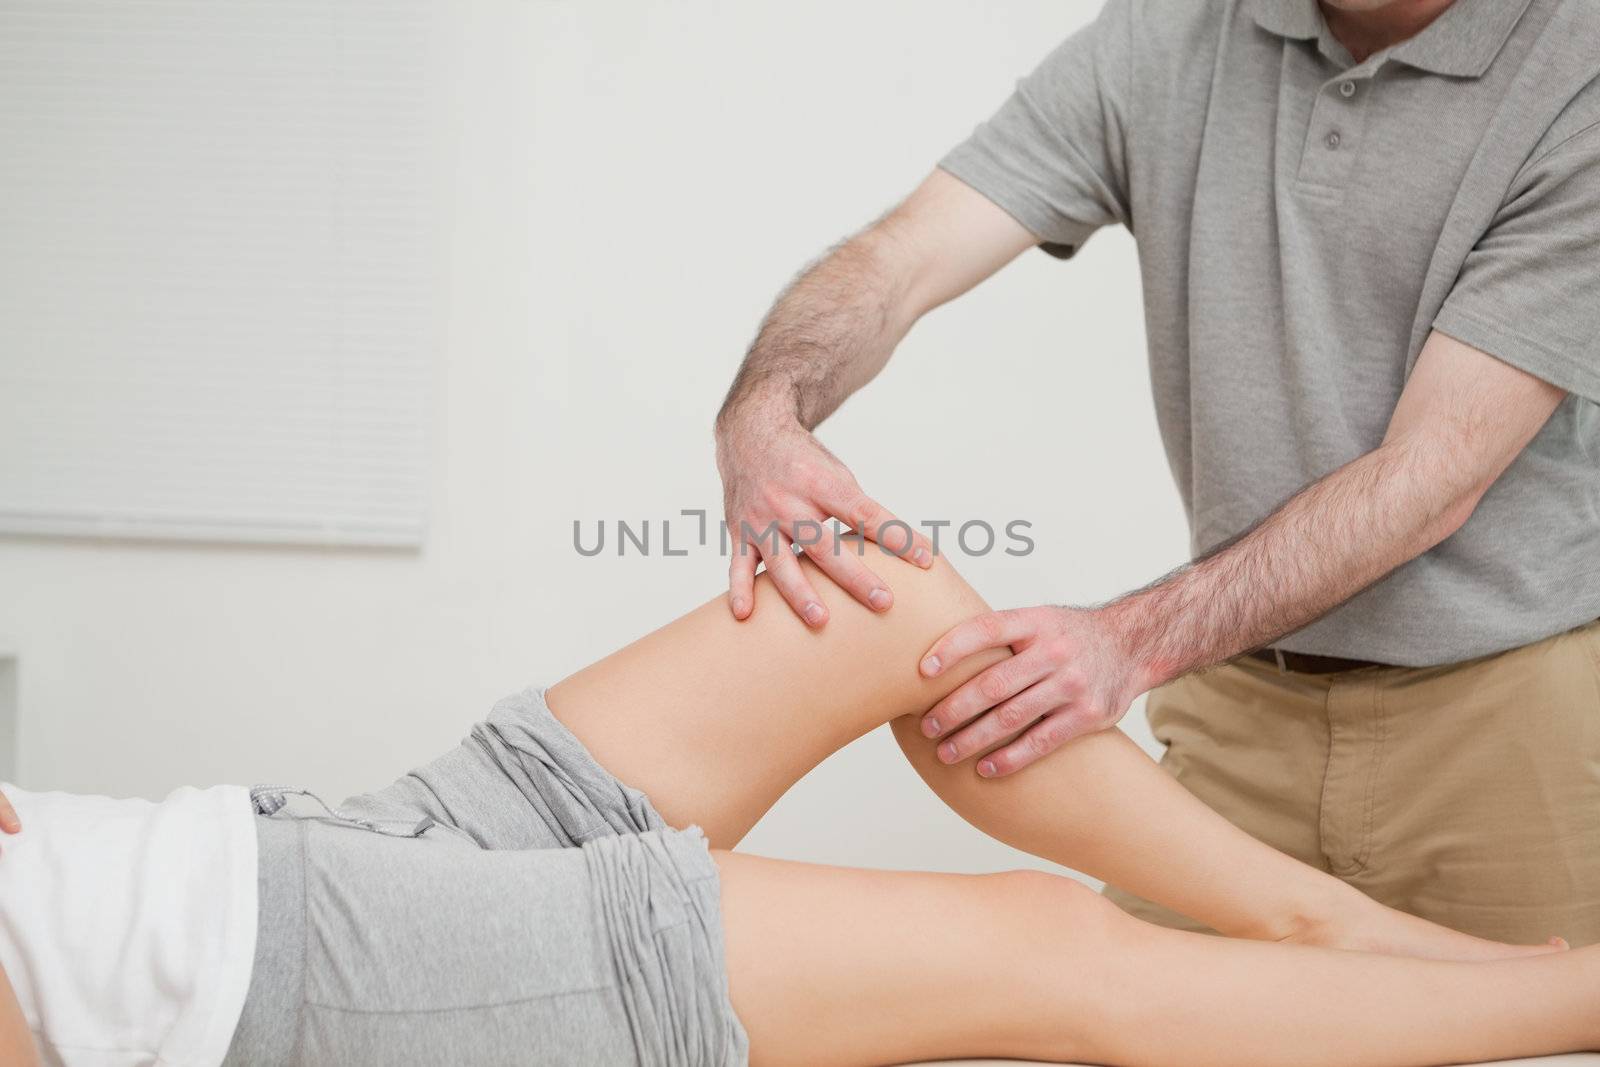 Knee of a woman being massaged by a physiotherapist in a room